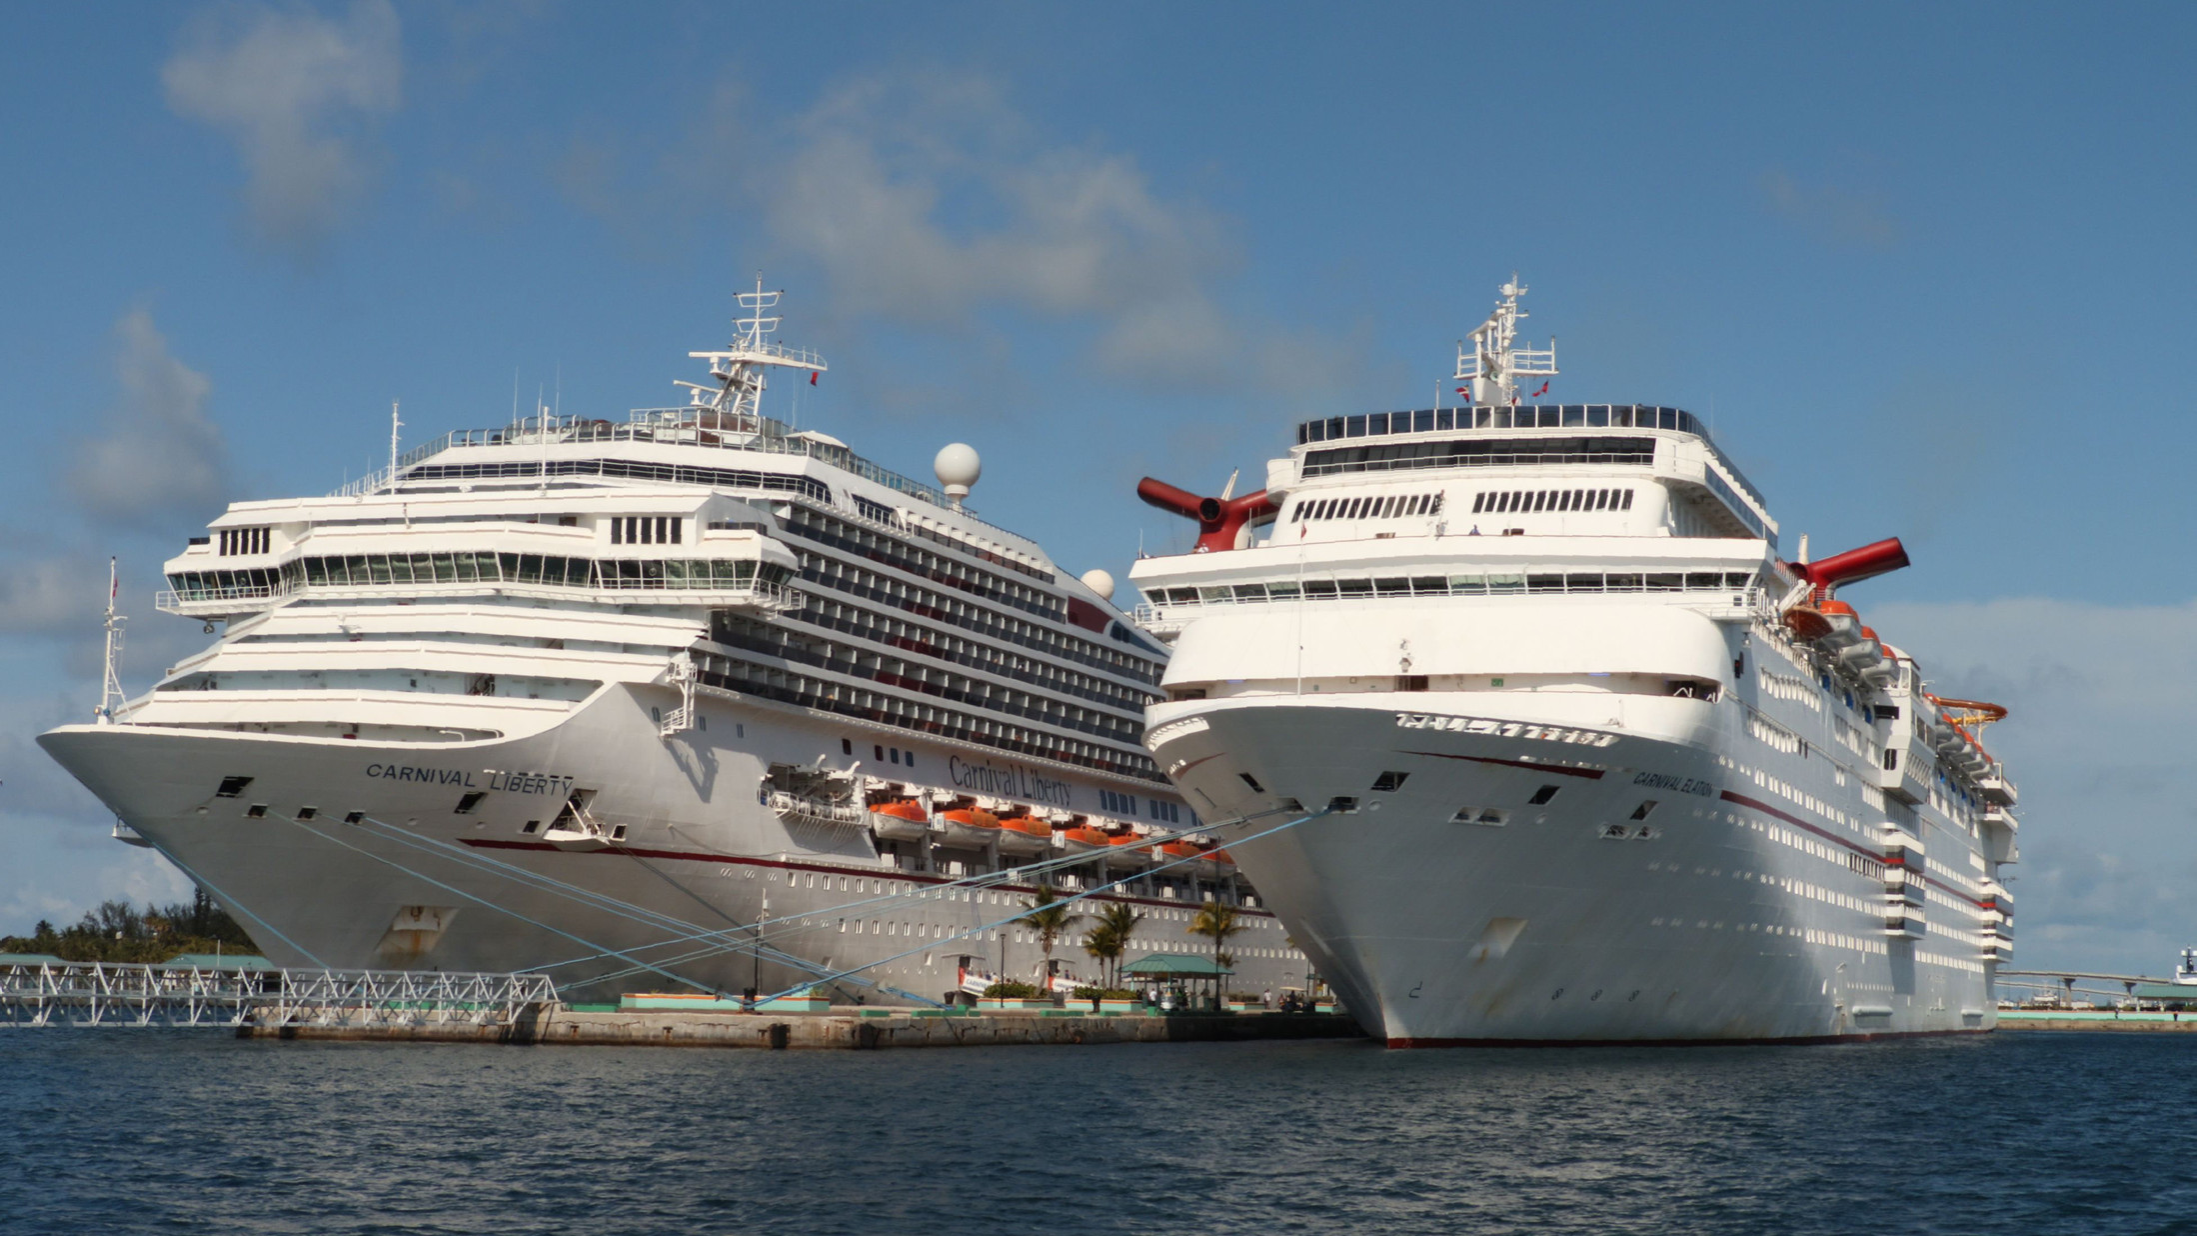 Carnival to pay 11.5% coupon on bond secured against cruise ships